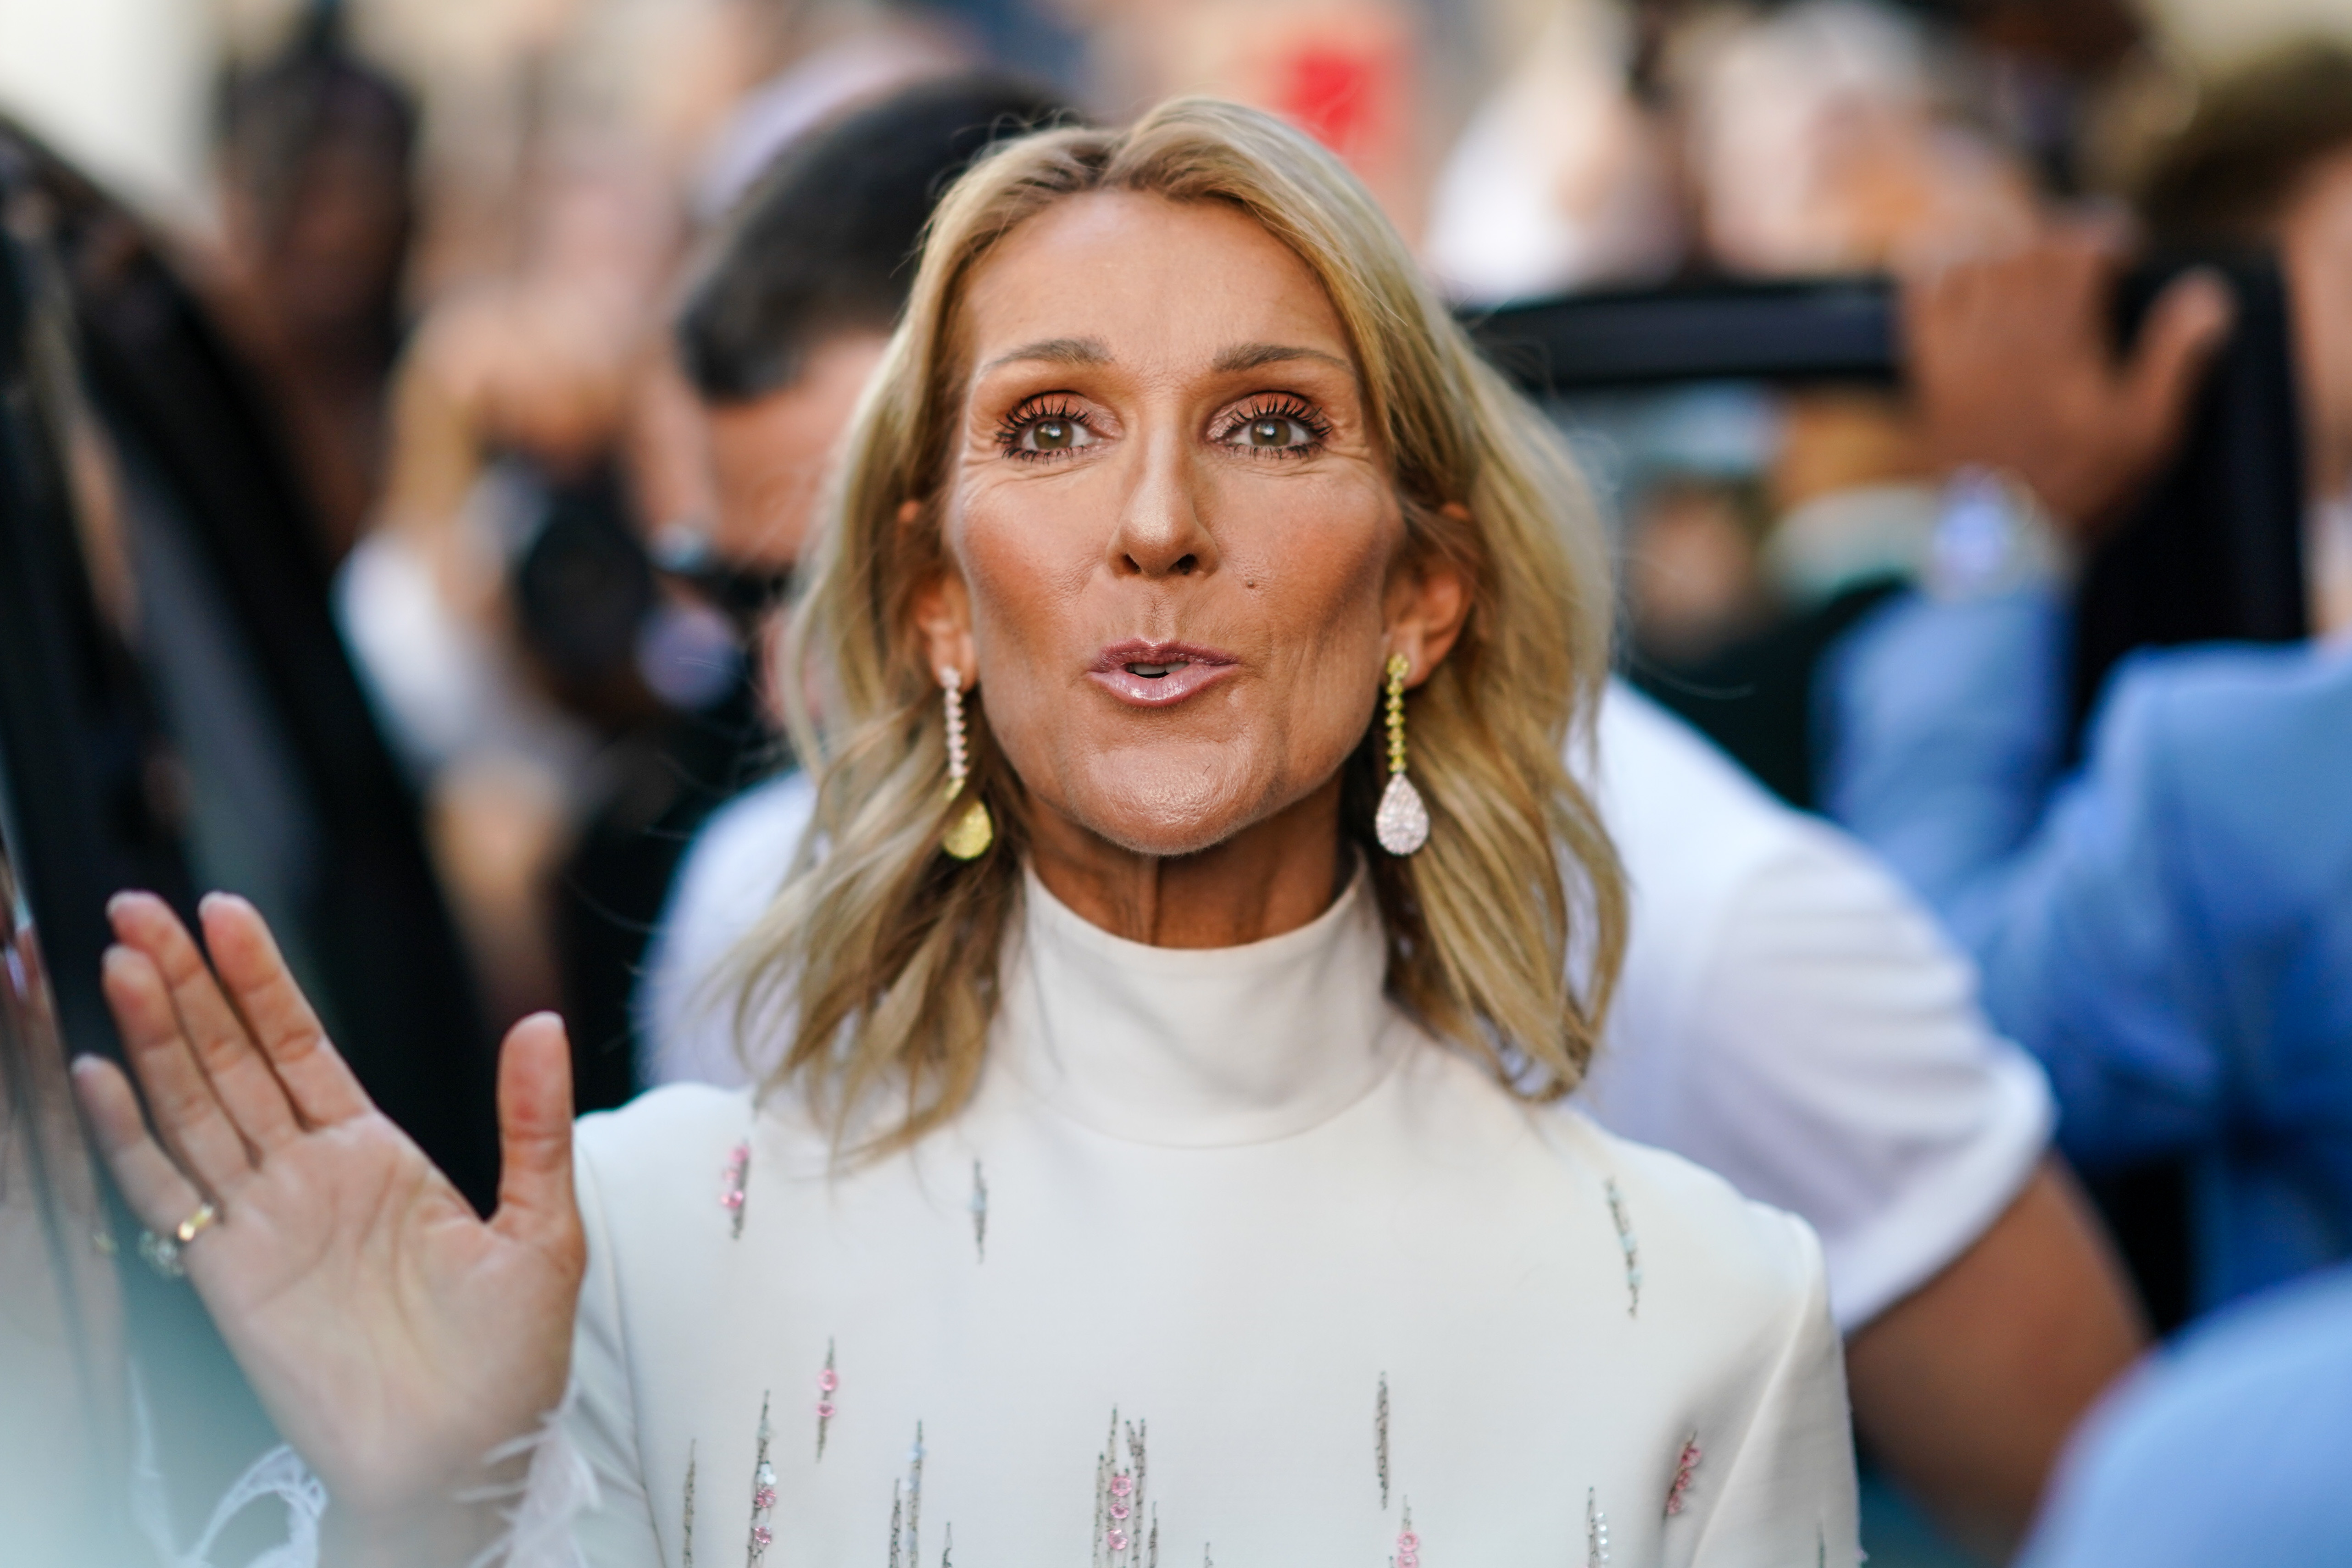 Celine Dion is seen, outside Valentino, during Paris Fashion Week Haute Couture Fall/Winter 2019/20, in Paris, France, on July 3, 2019. | Source: Getty Images